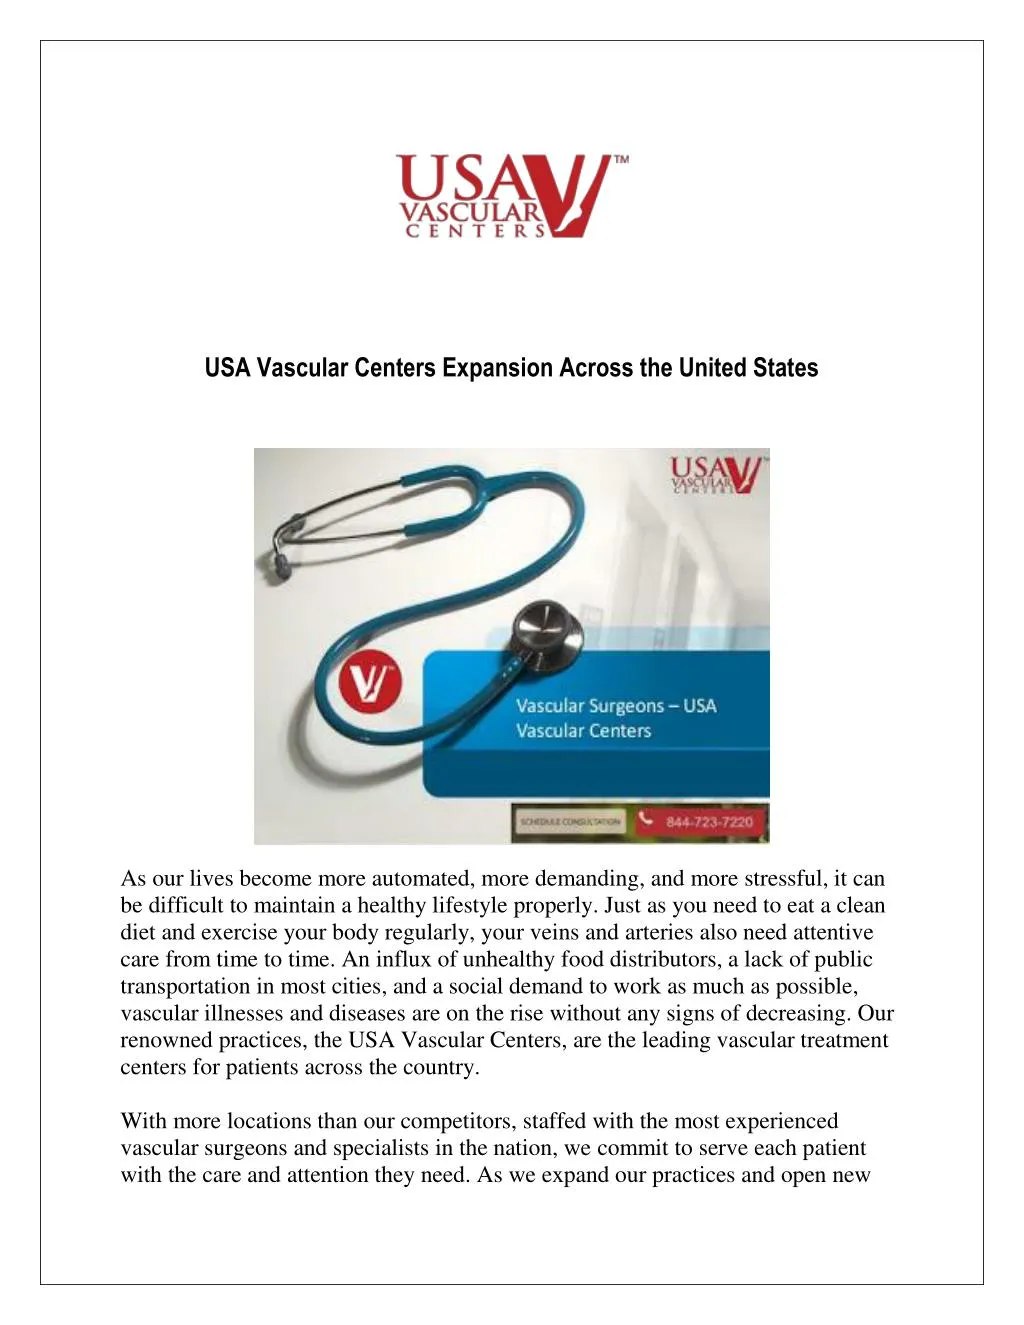 usa vascular centers expansion across the united